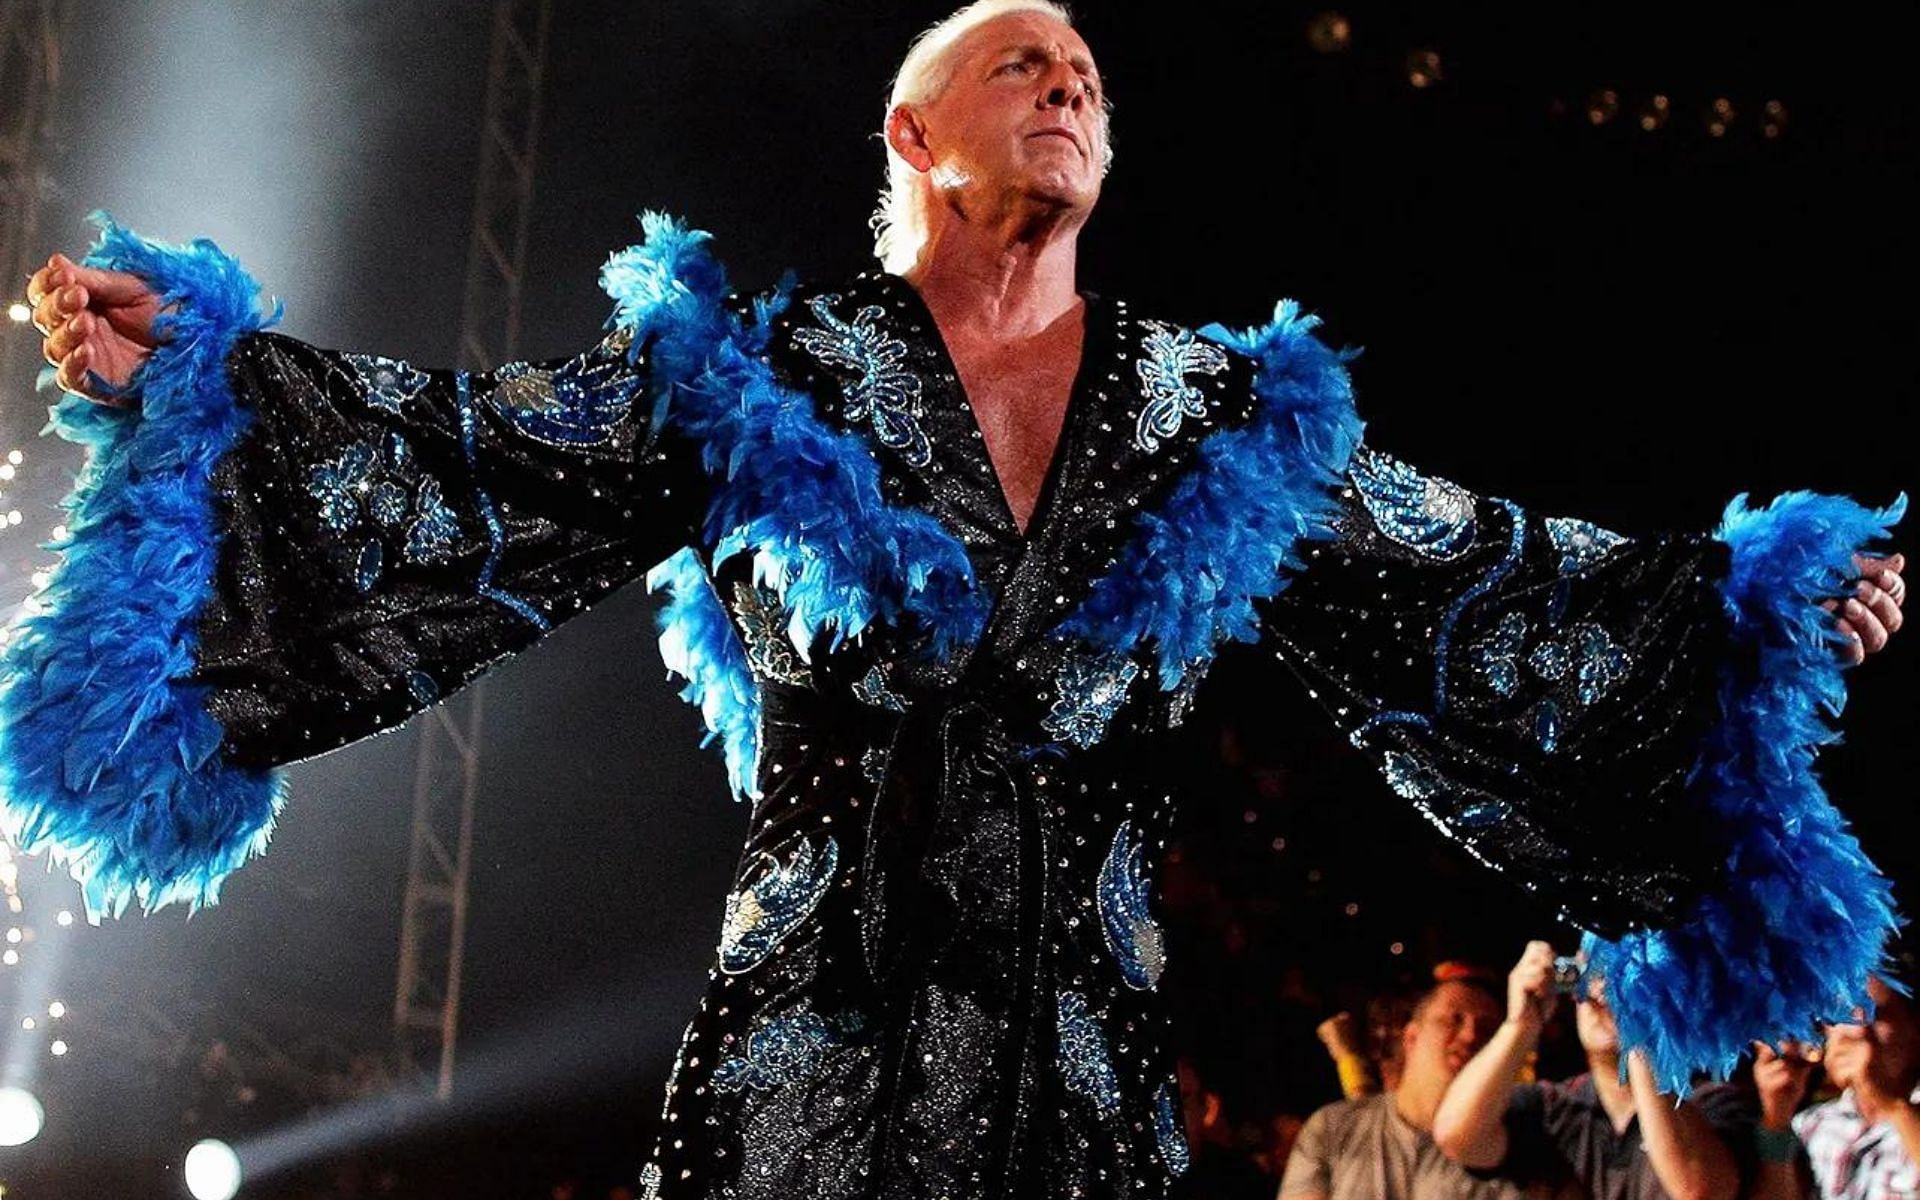 Ric Flair names his former opponent the best performer!